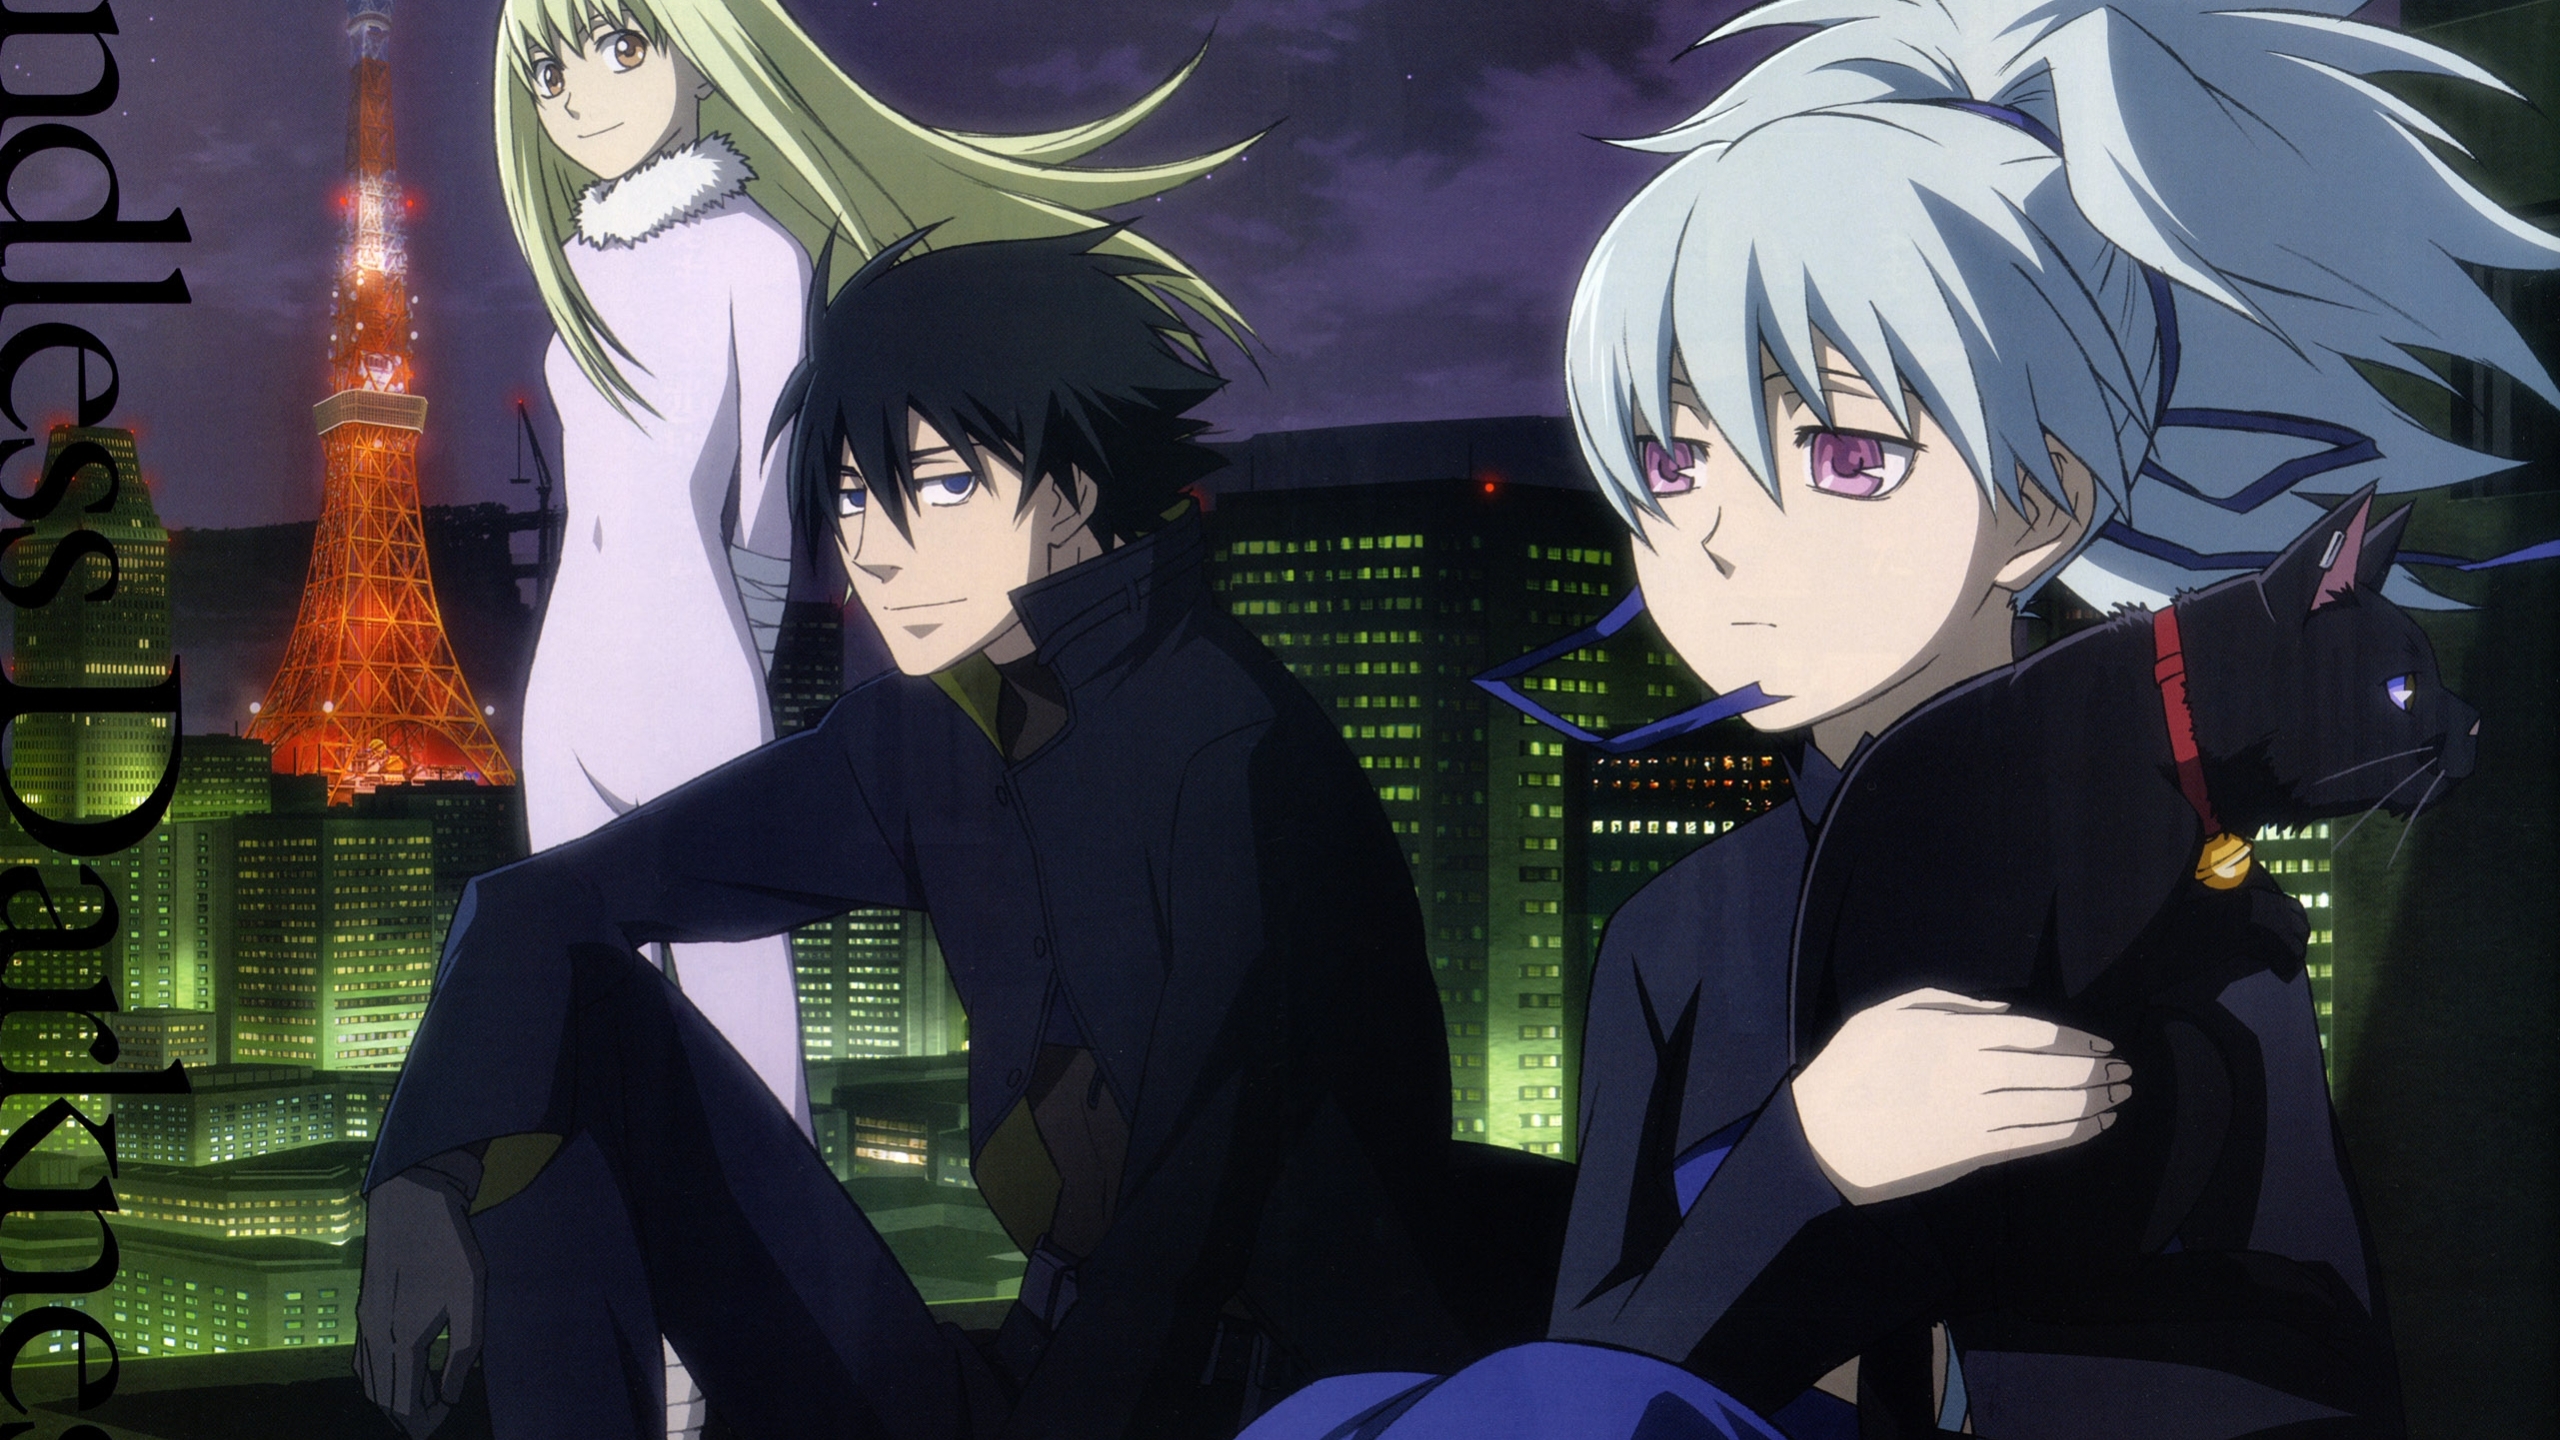 2560x1440 Darker Than Black Boy Girls 1440p Resolution Wallpaper Hd Anime 4k Wallpapers Images Photos And Background